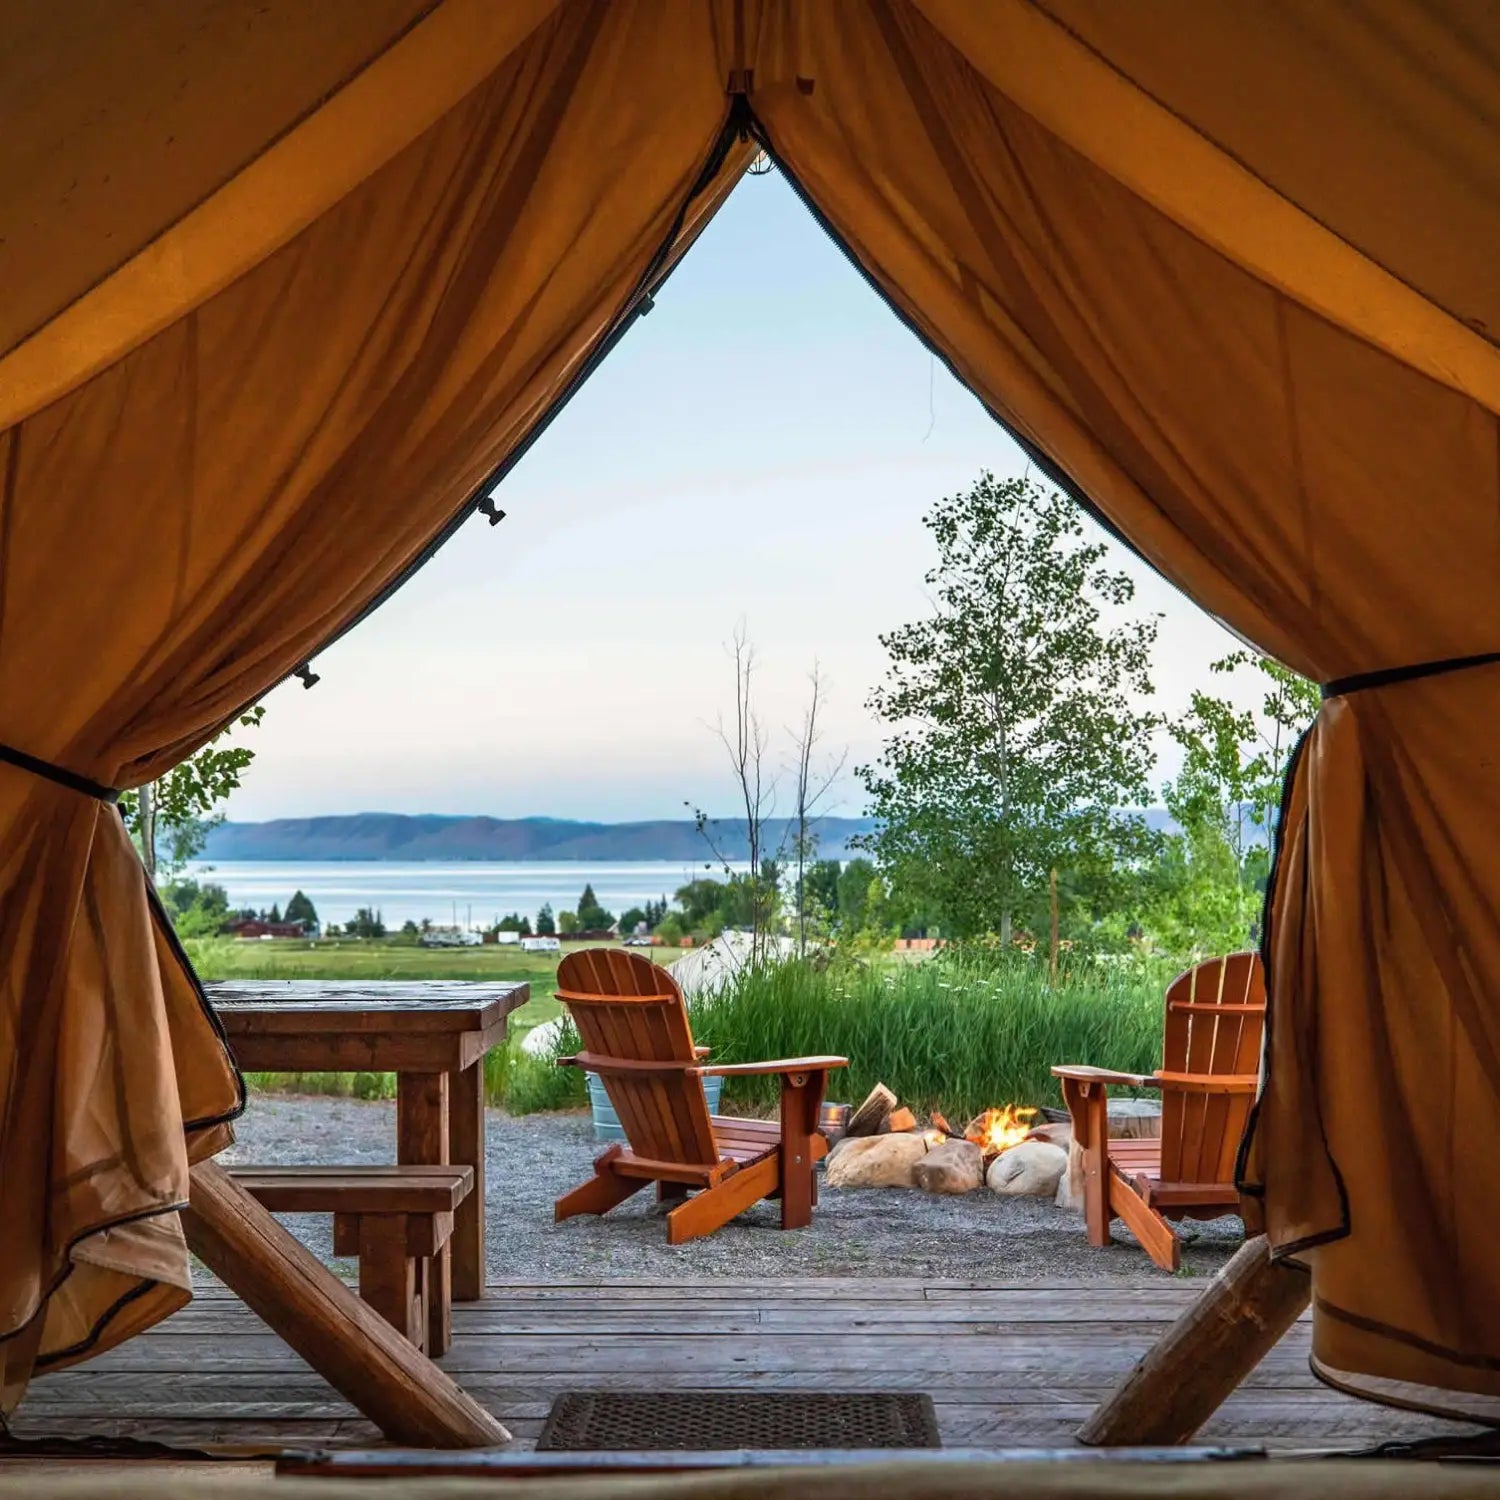 Get your must-have accessories for Glamping